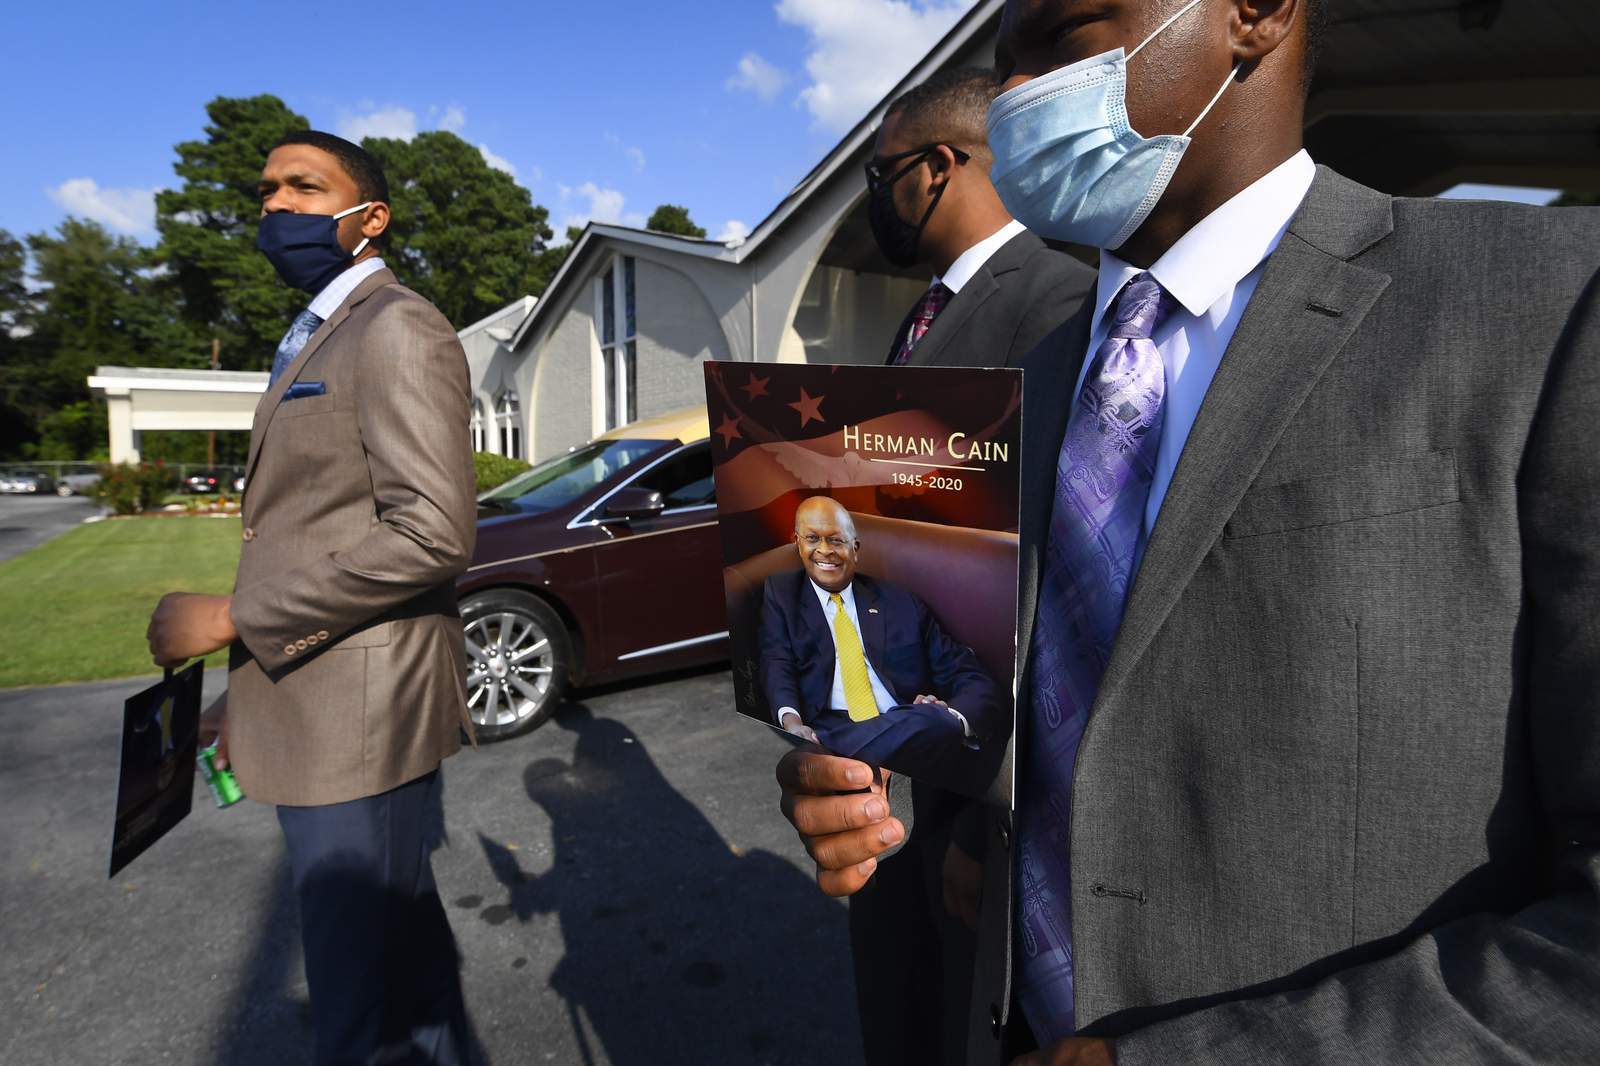 Herman Cain is mourned, celebrated at his funeral in Atlanta